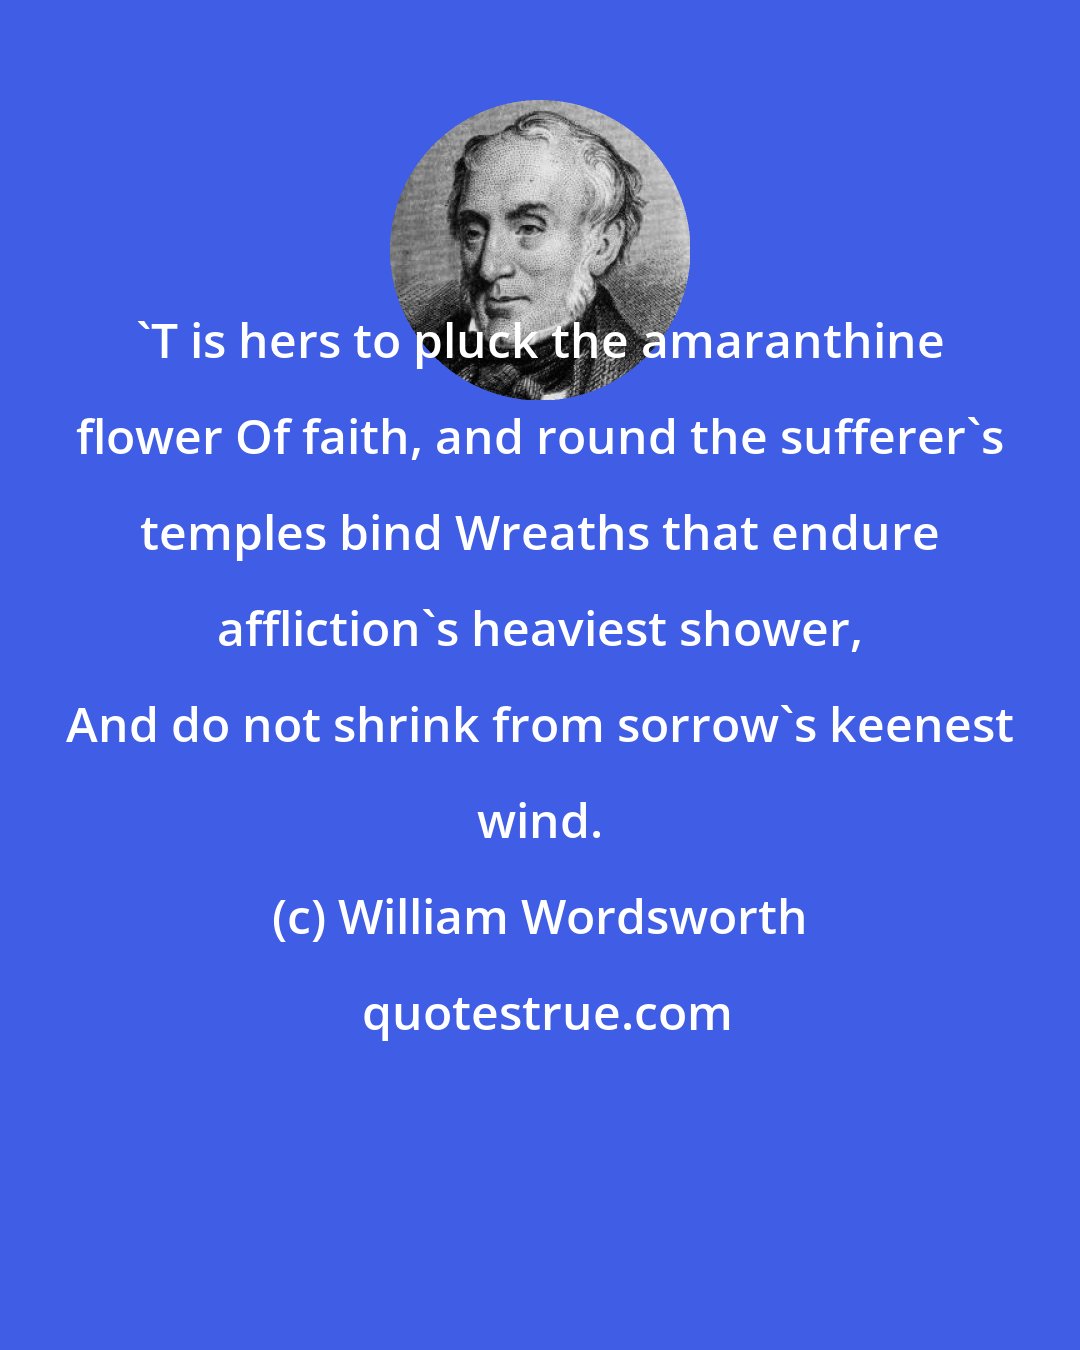 William Wordsworth: 'T is hers to pluck the amaranthine flower Of faith, and round the sufferer's temples bind Wreaths that endure affliction's heaviest shower, And do not shrink from sorrow's keenest wind.